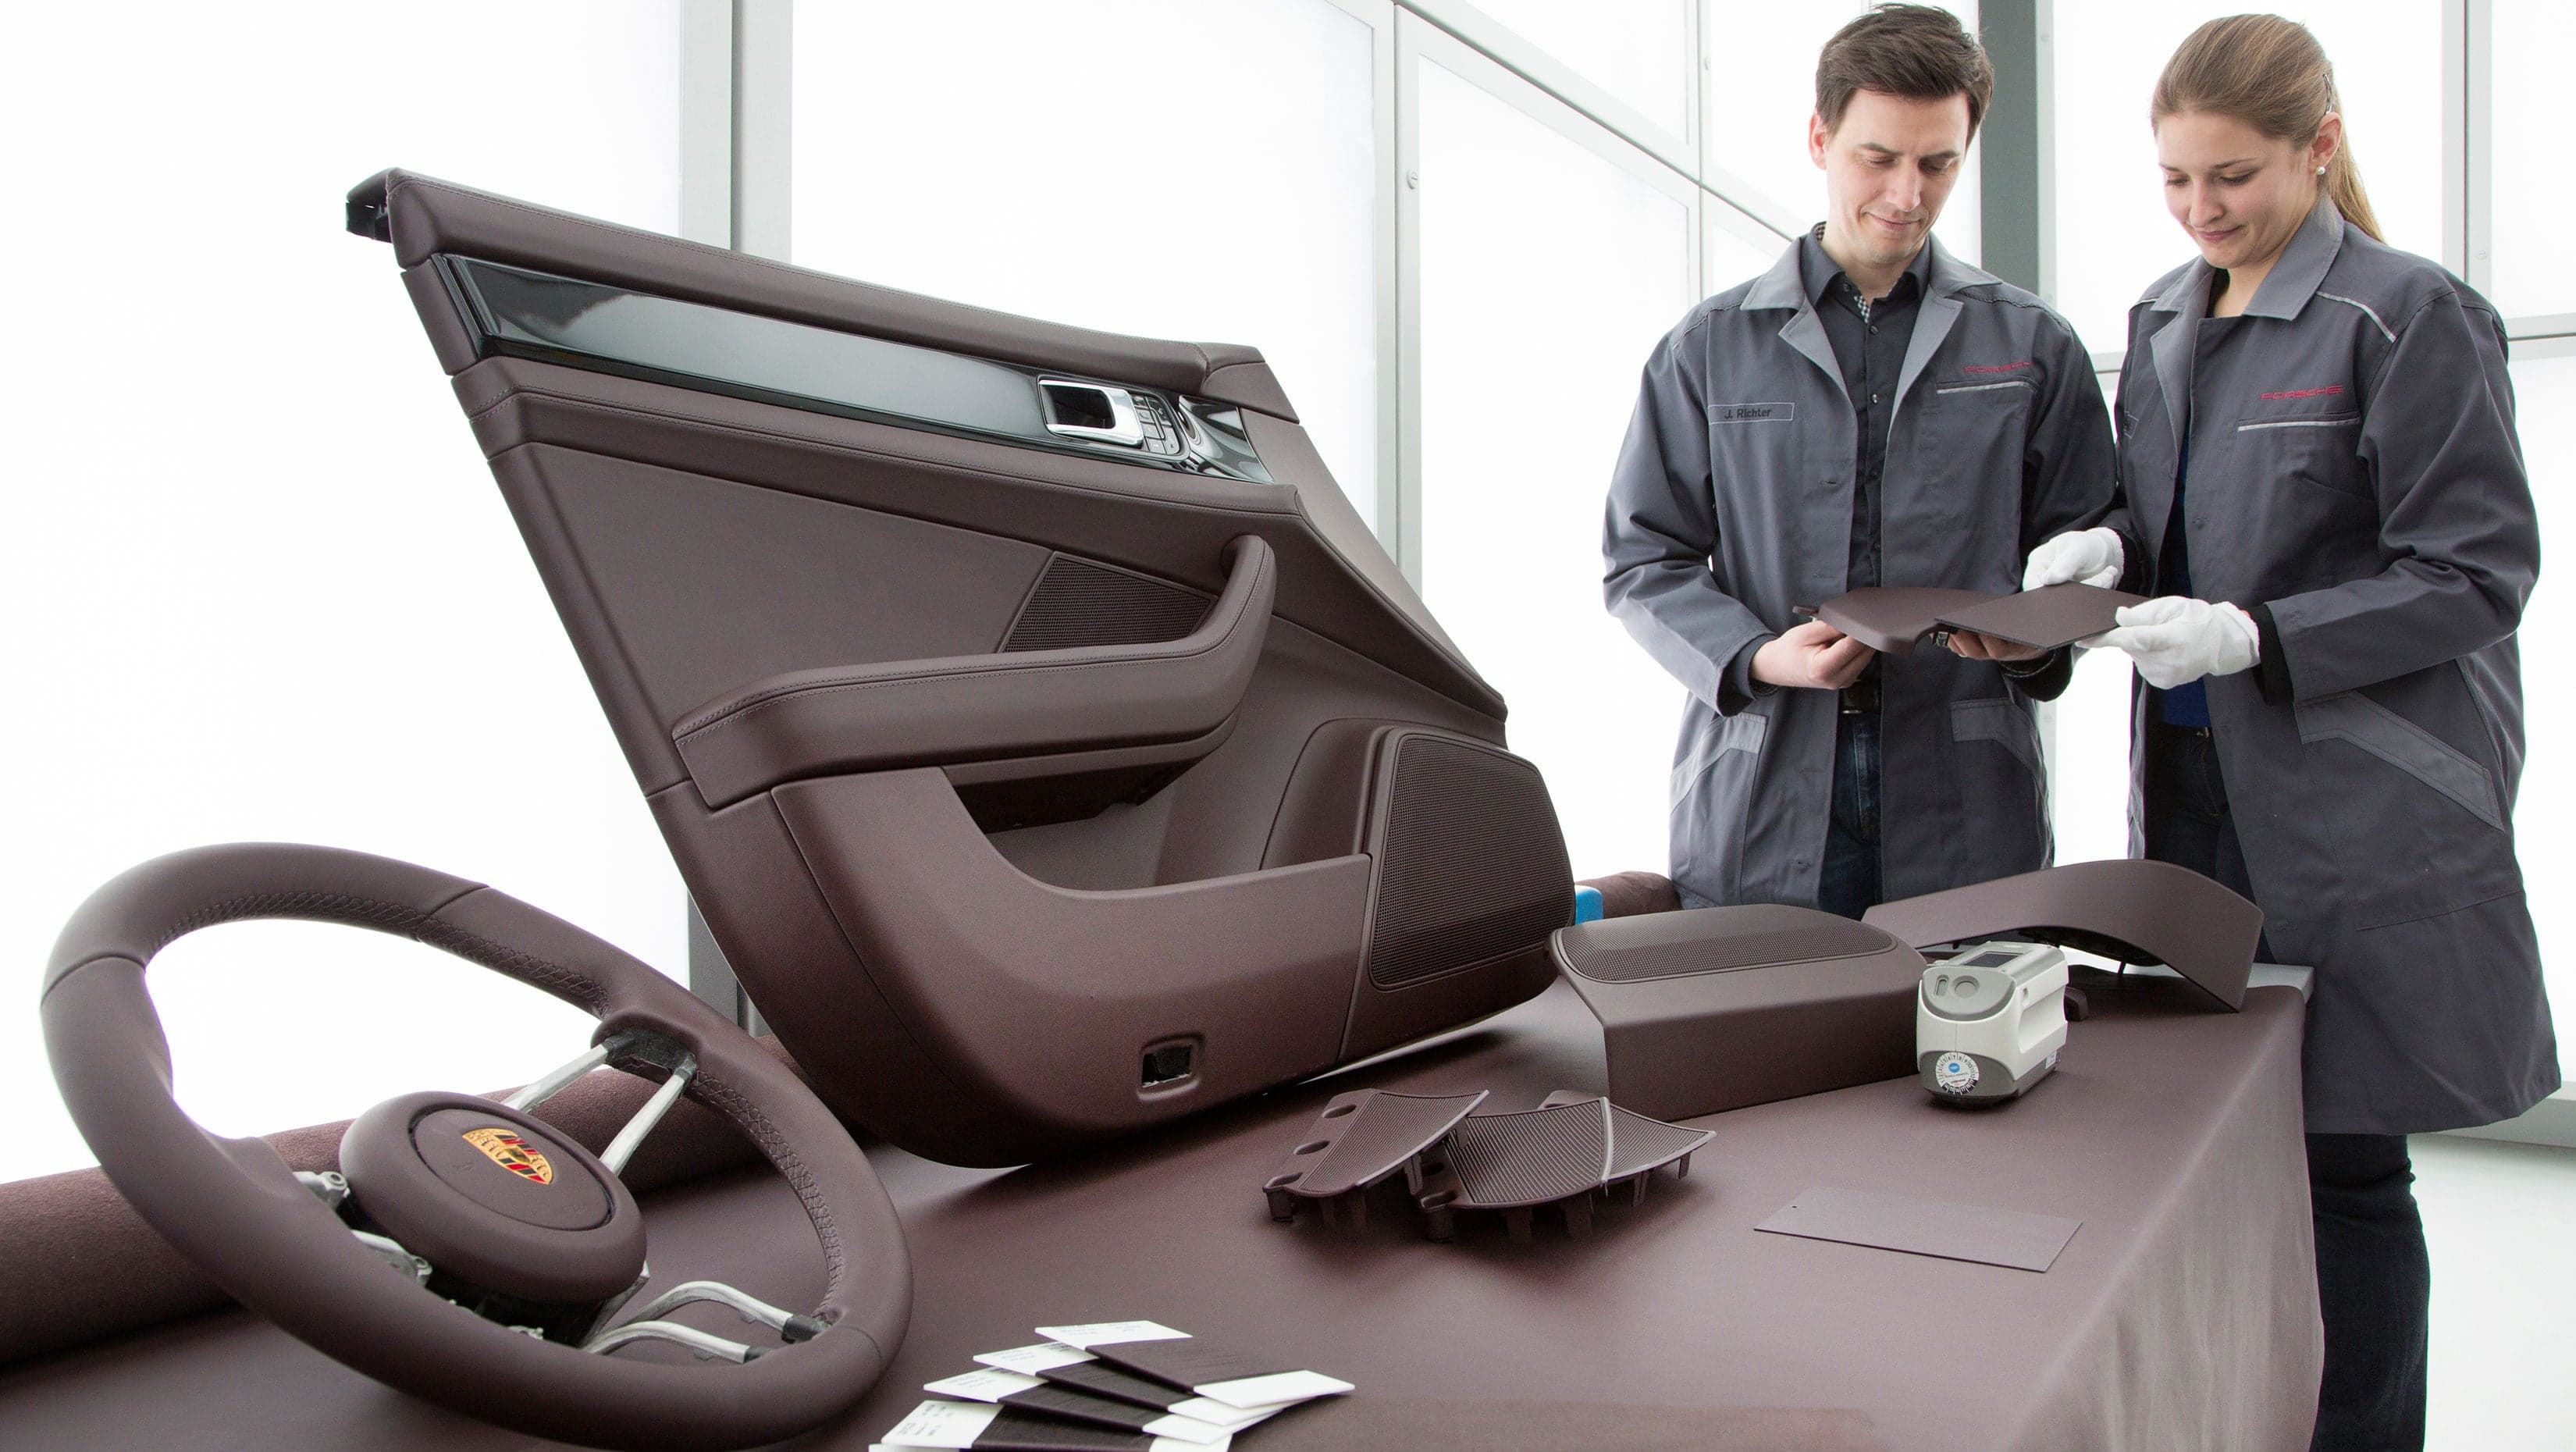 Porsche’s Intense Interior Color Matching Process Is All About The Details